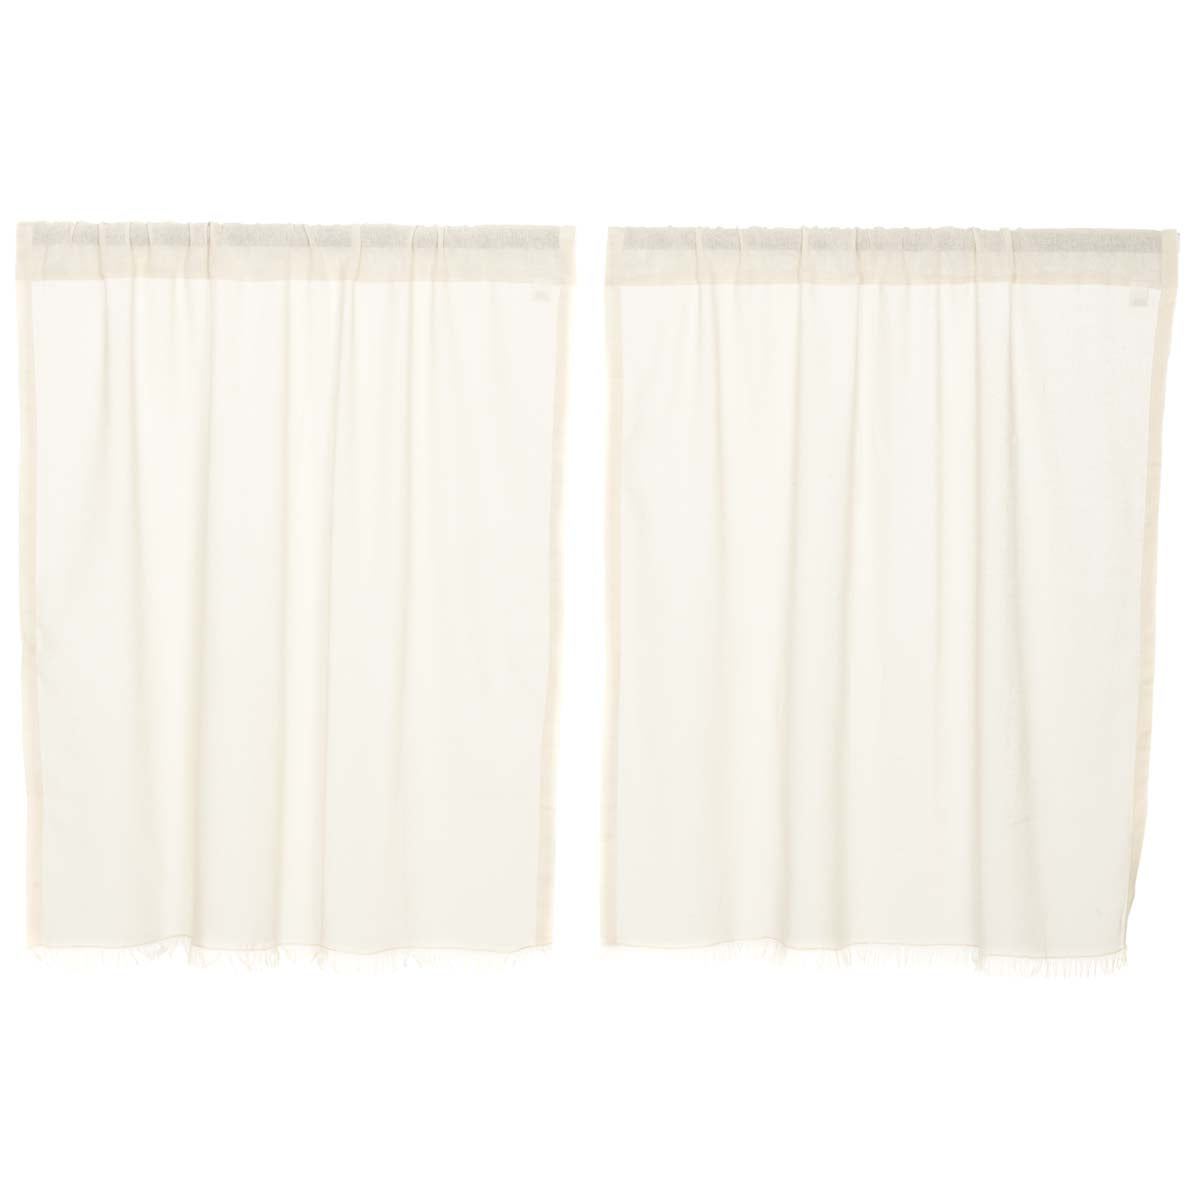 April & Olive Tobacco Cloth Antique White Tier Fringed Set of 2 L36xW36 By VHC Brands